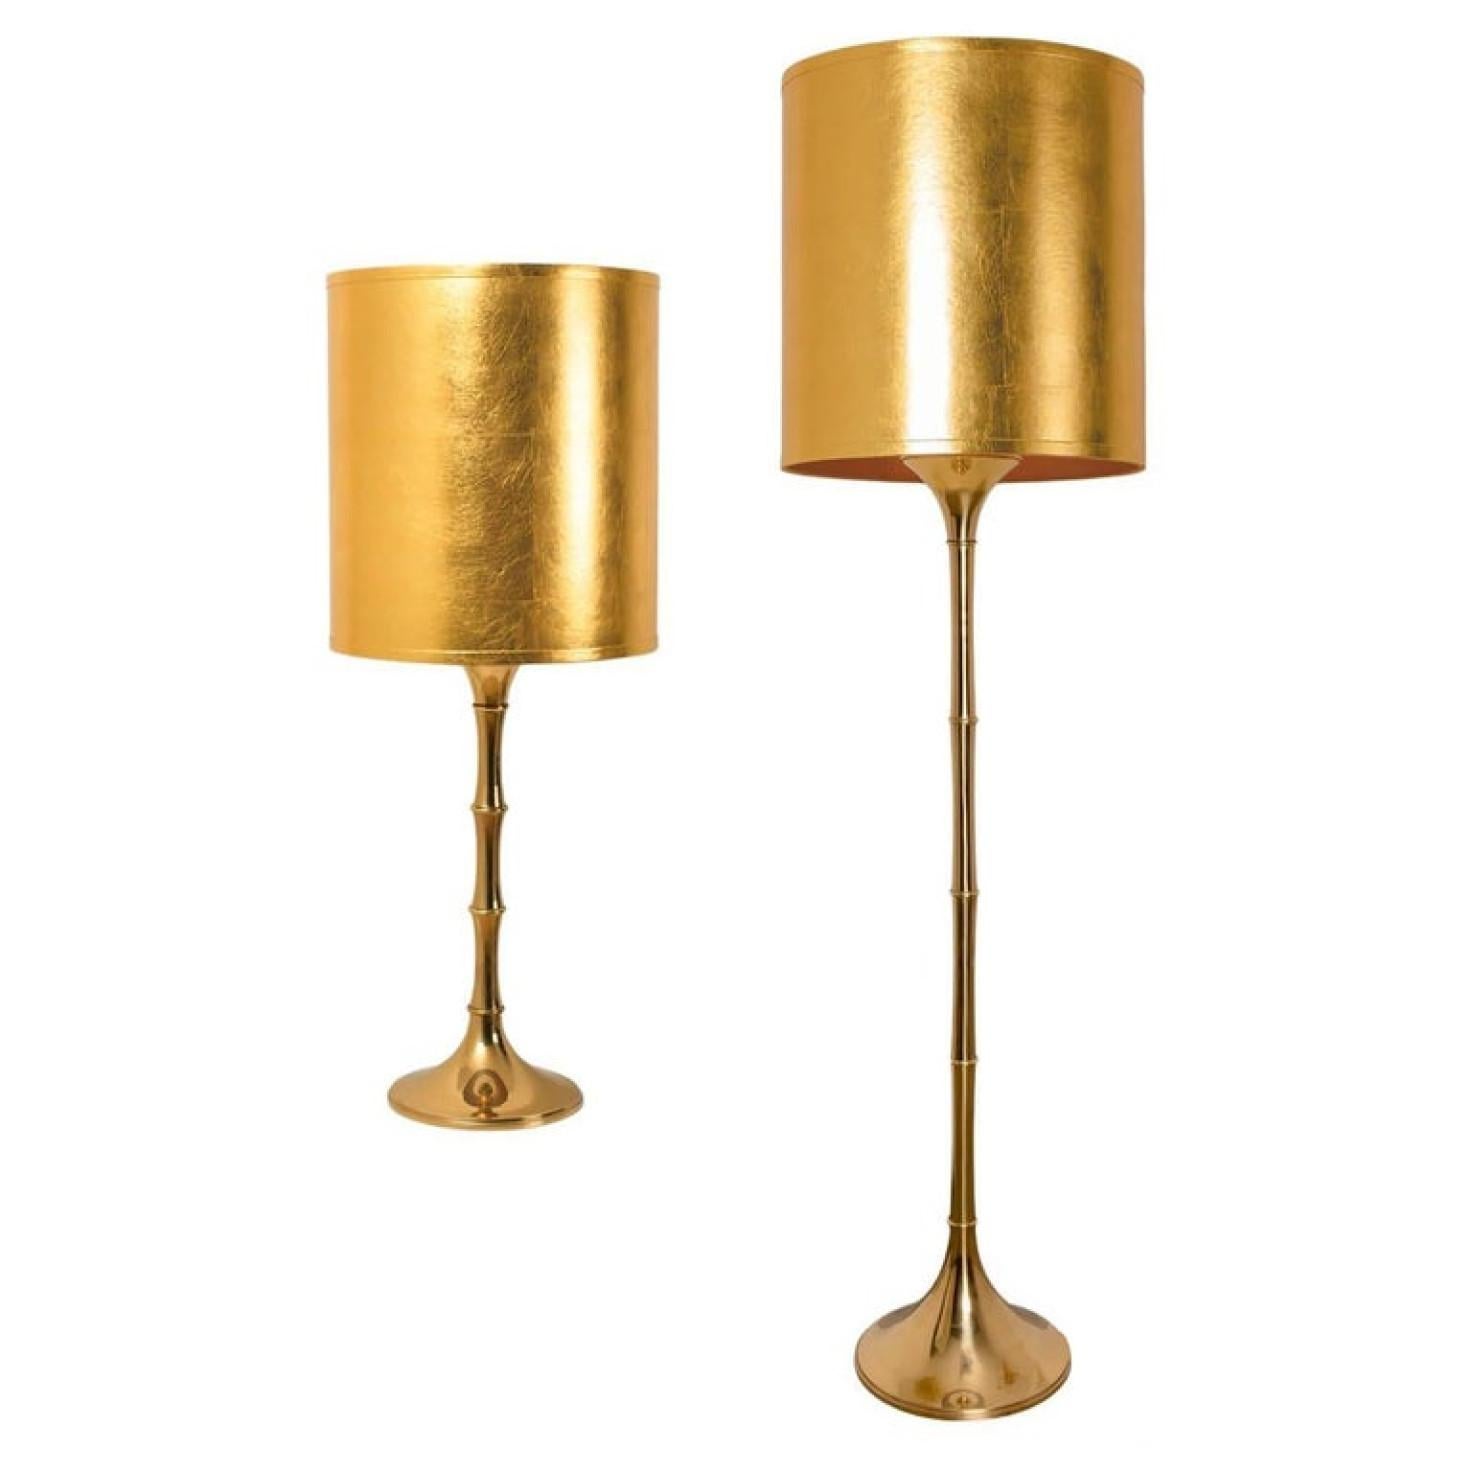 Elegant brass bamboo table and floor lamps Model designed by Ingo Maurer, 1968 for Design M Munich, Germany.
With new gold metal custom made lamp shades with Bronze inner shade. Made by Rene Houben.

Good original vintage condition. Wear